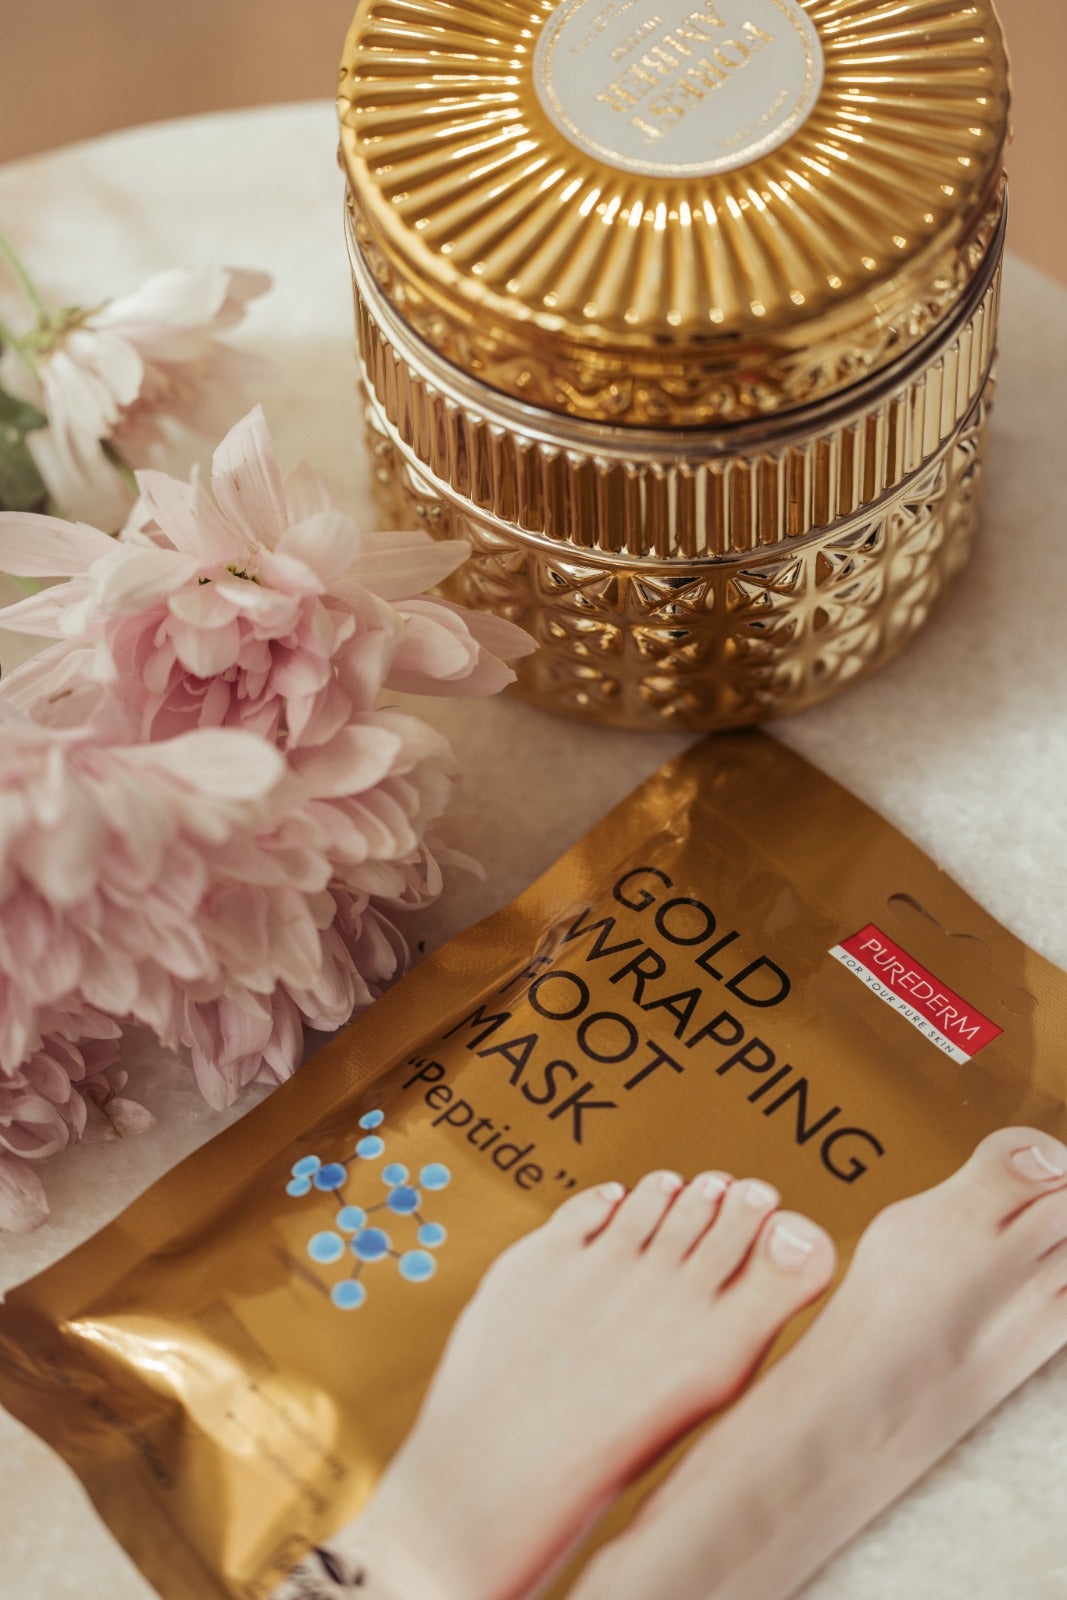 Gold wrapping foot mask “peptide”